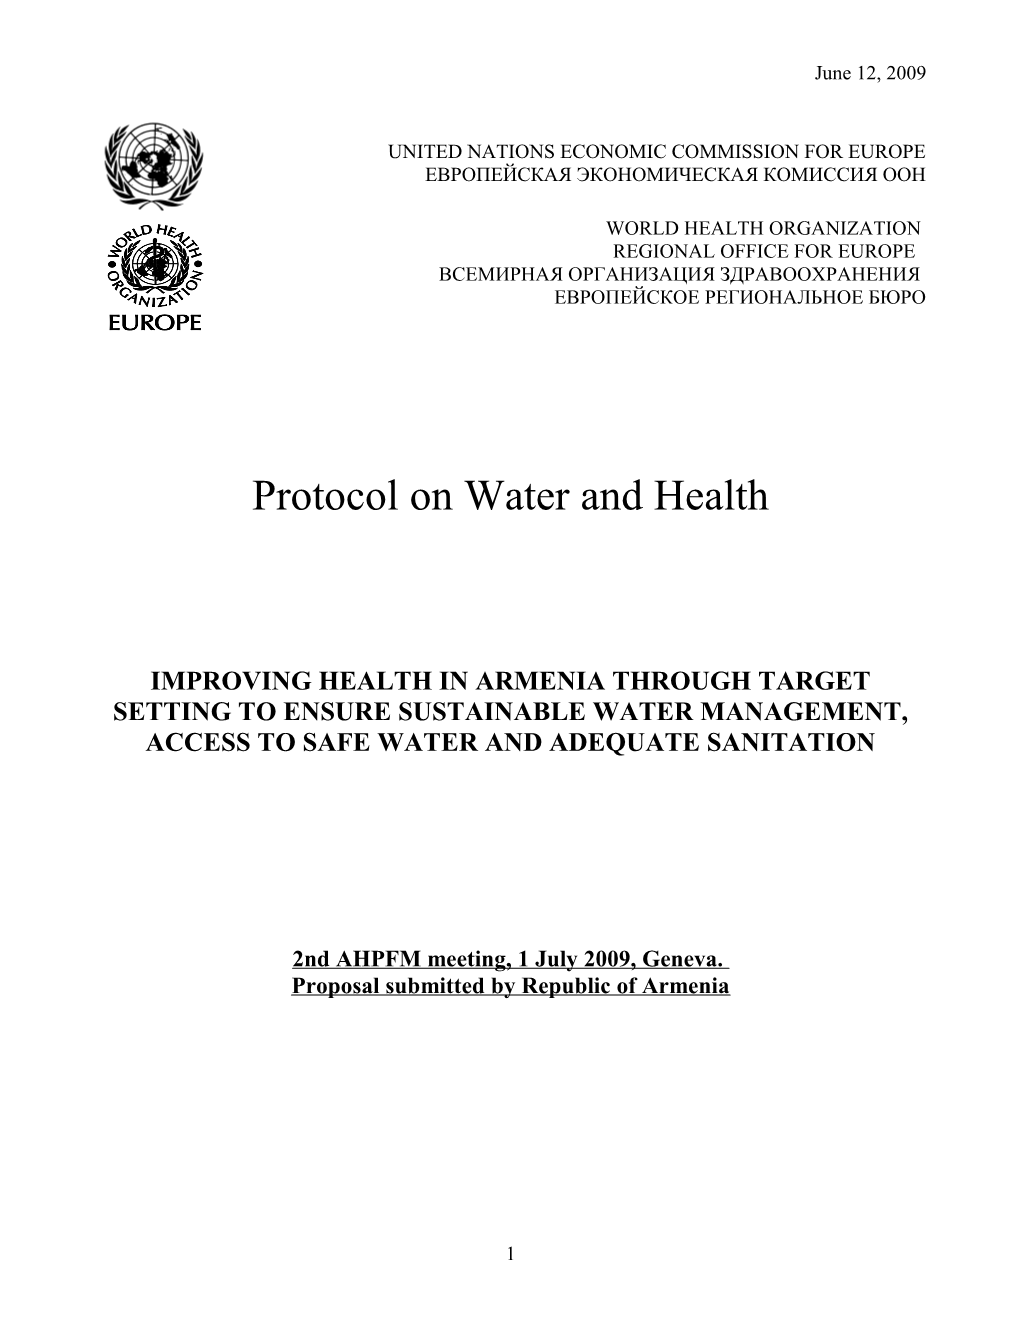 Protocol on Water and Health